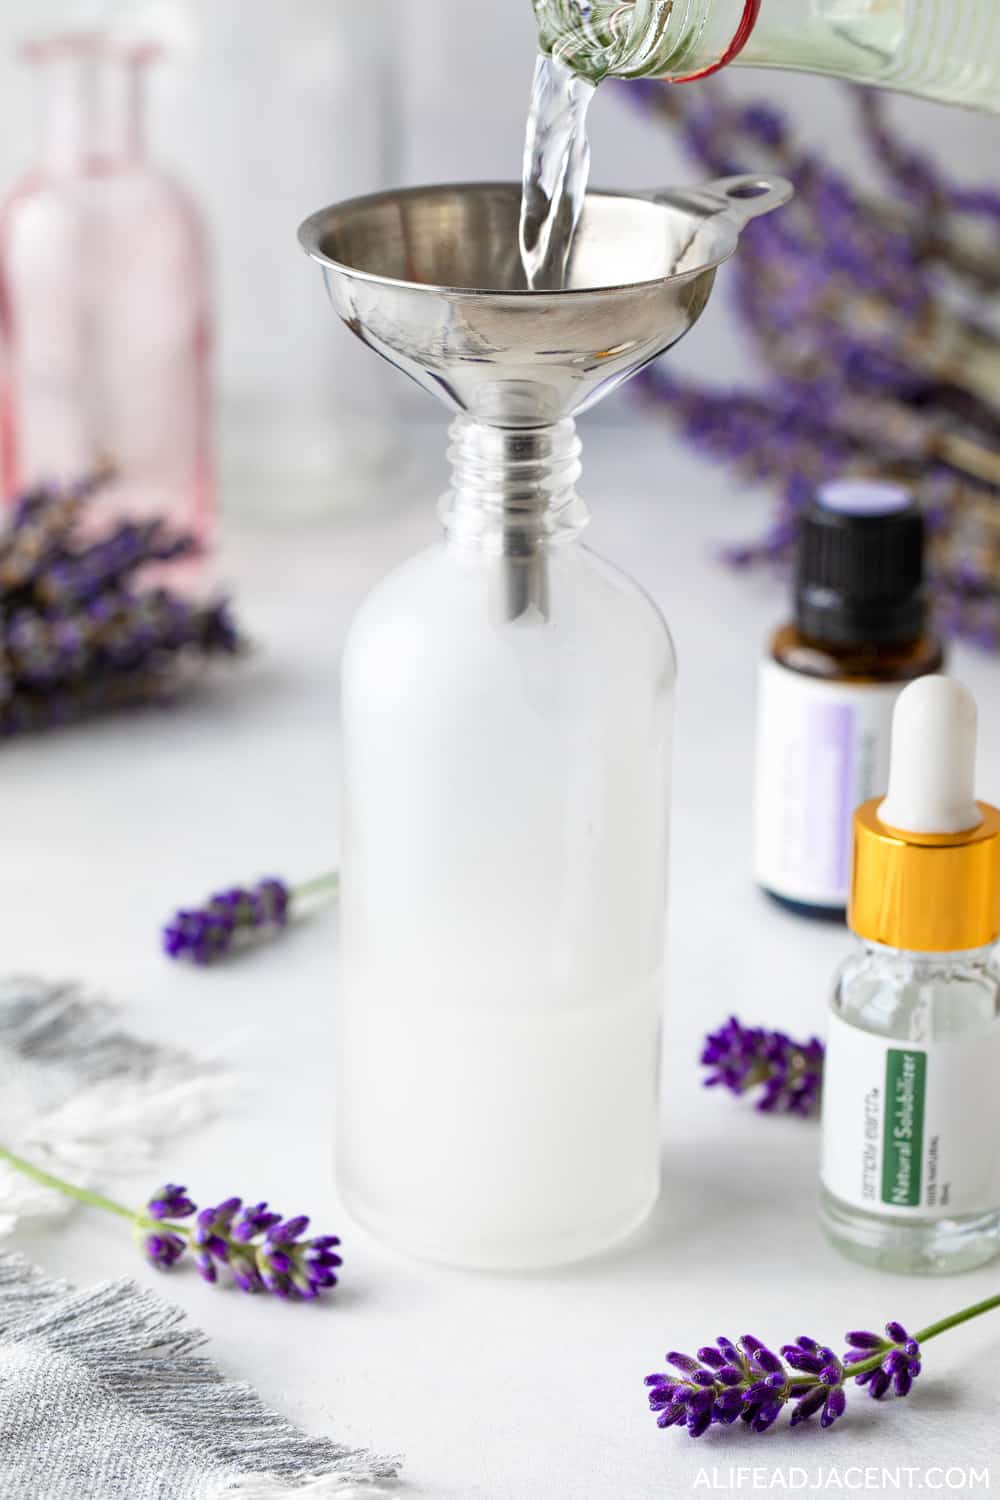 Pouring vodka into spray bottle to make pillow spray with essential oils